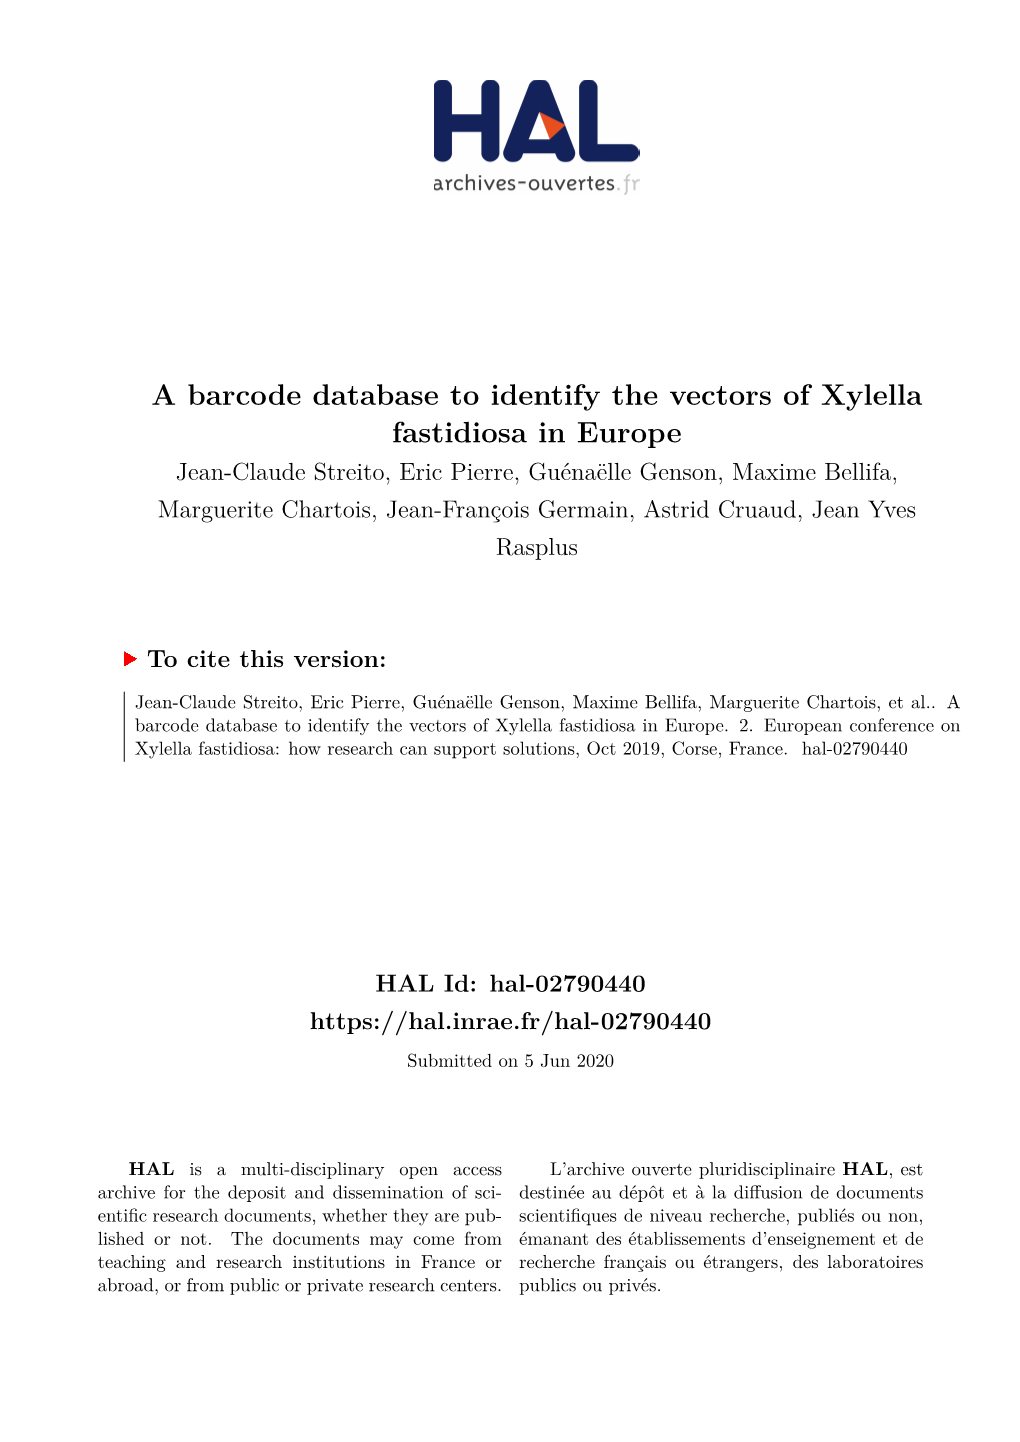 A Barcode Database to Identify the Vectors of Xylella Fastidiosa in Europe